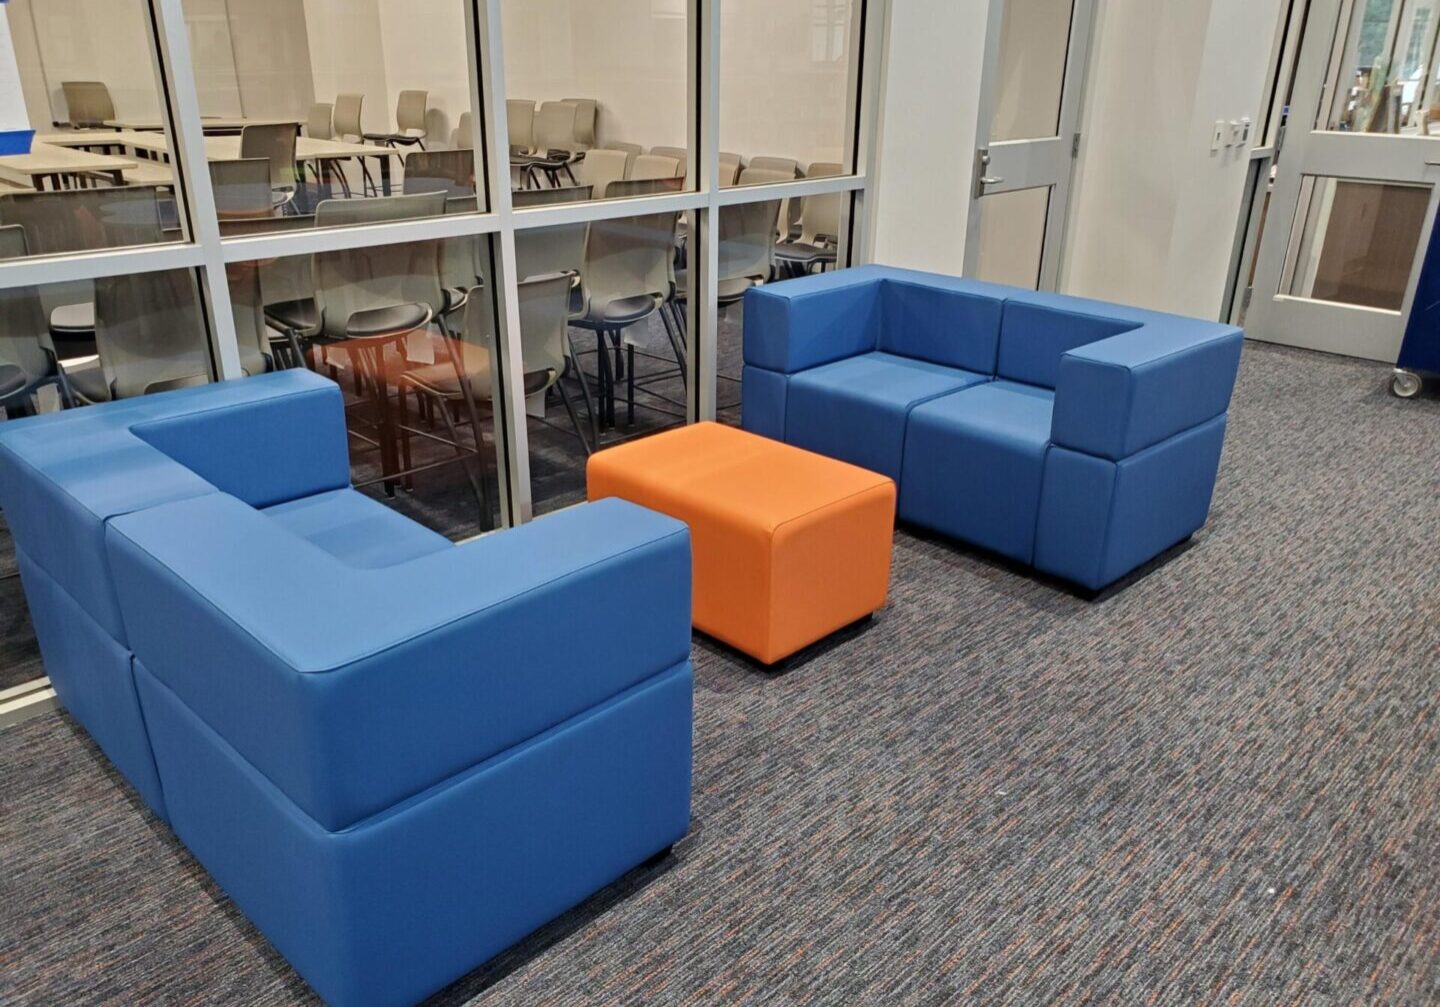 A room with two blue couches and an orange ottoman.